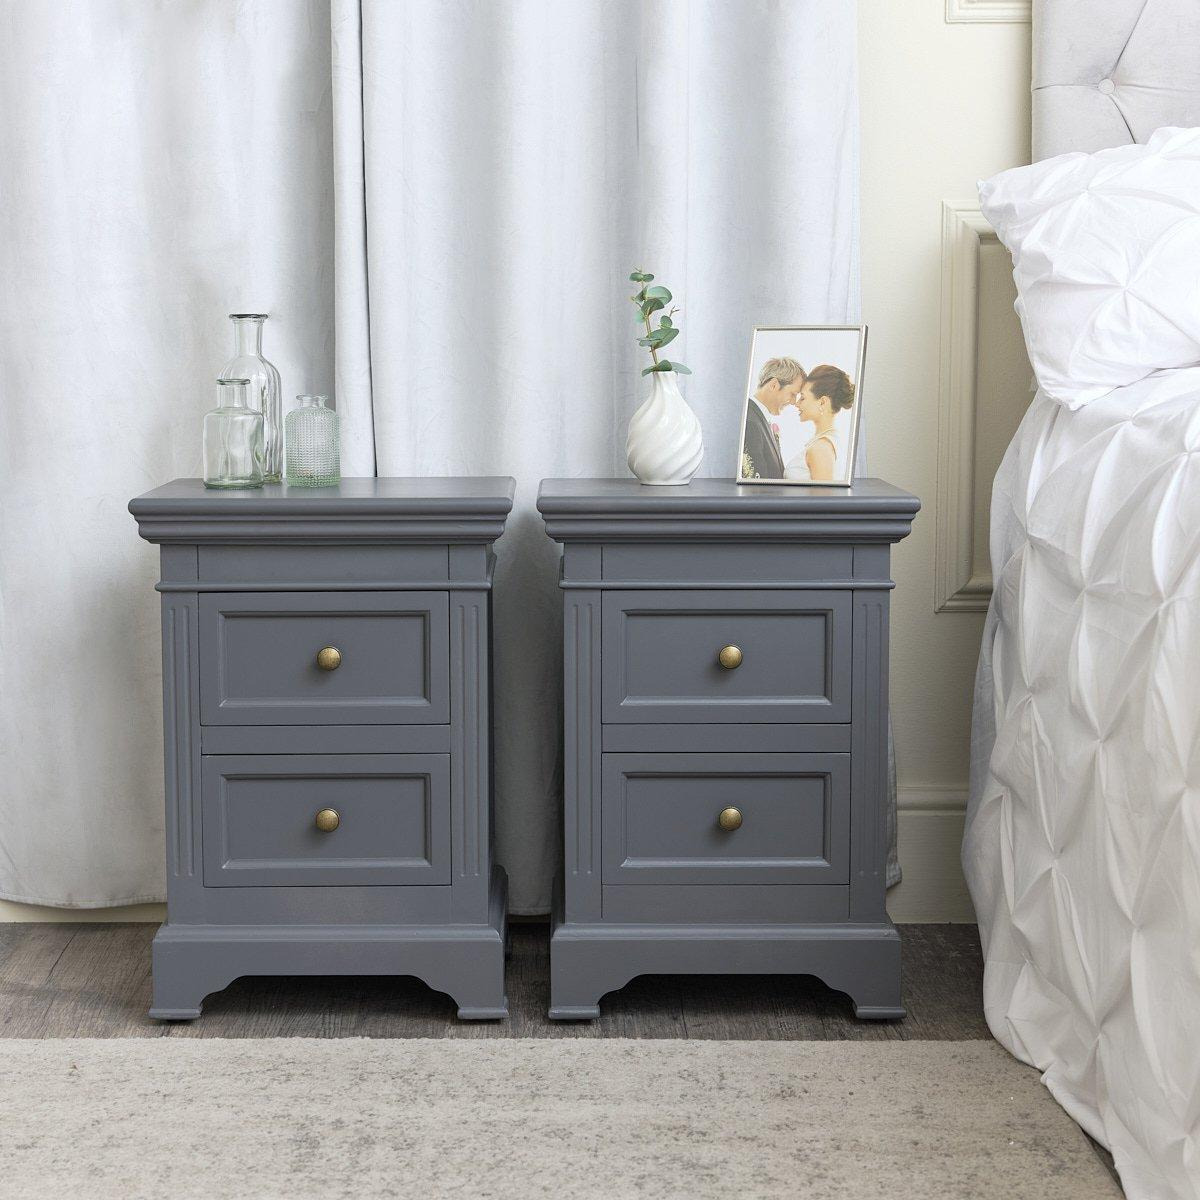 Pair Of Midnight Grey Two Drawer Bedside Tables - Daventry Midnight Grey Range - image 1